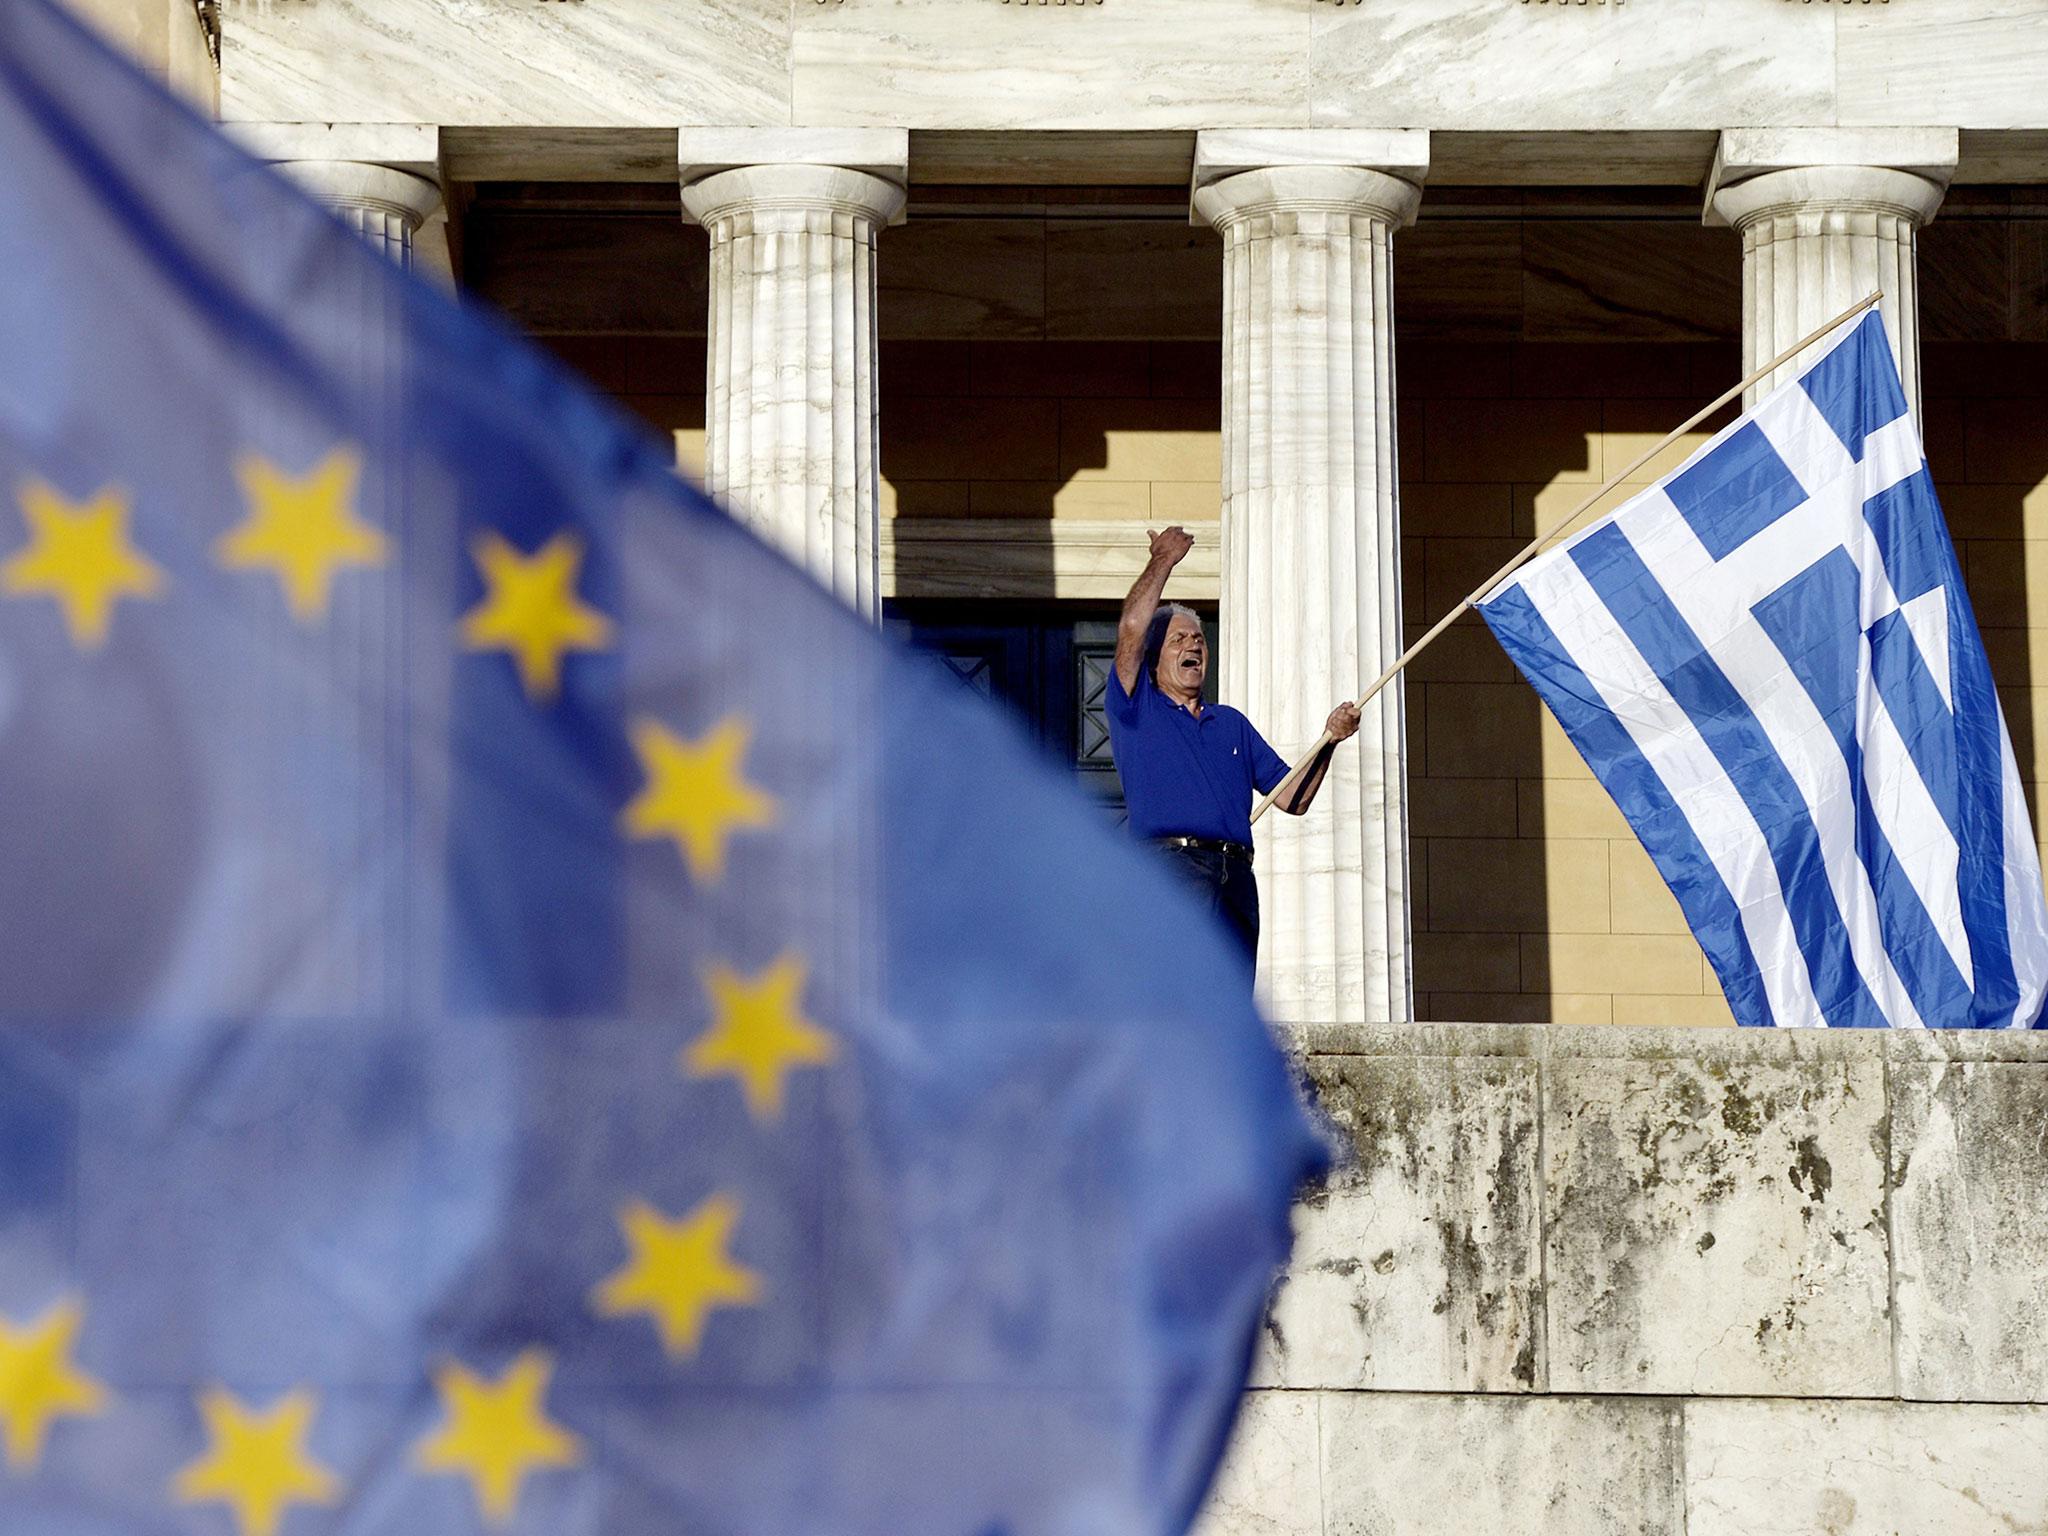 A protester shouts slogans during a pro-European demonstration in front of the Greek parliament in Athens. Greece's international lenders raised hopes for a vital bailout agreement to save Athens from default and a possible euro exit, despite warning no d